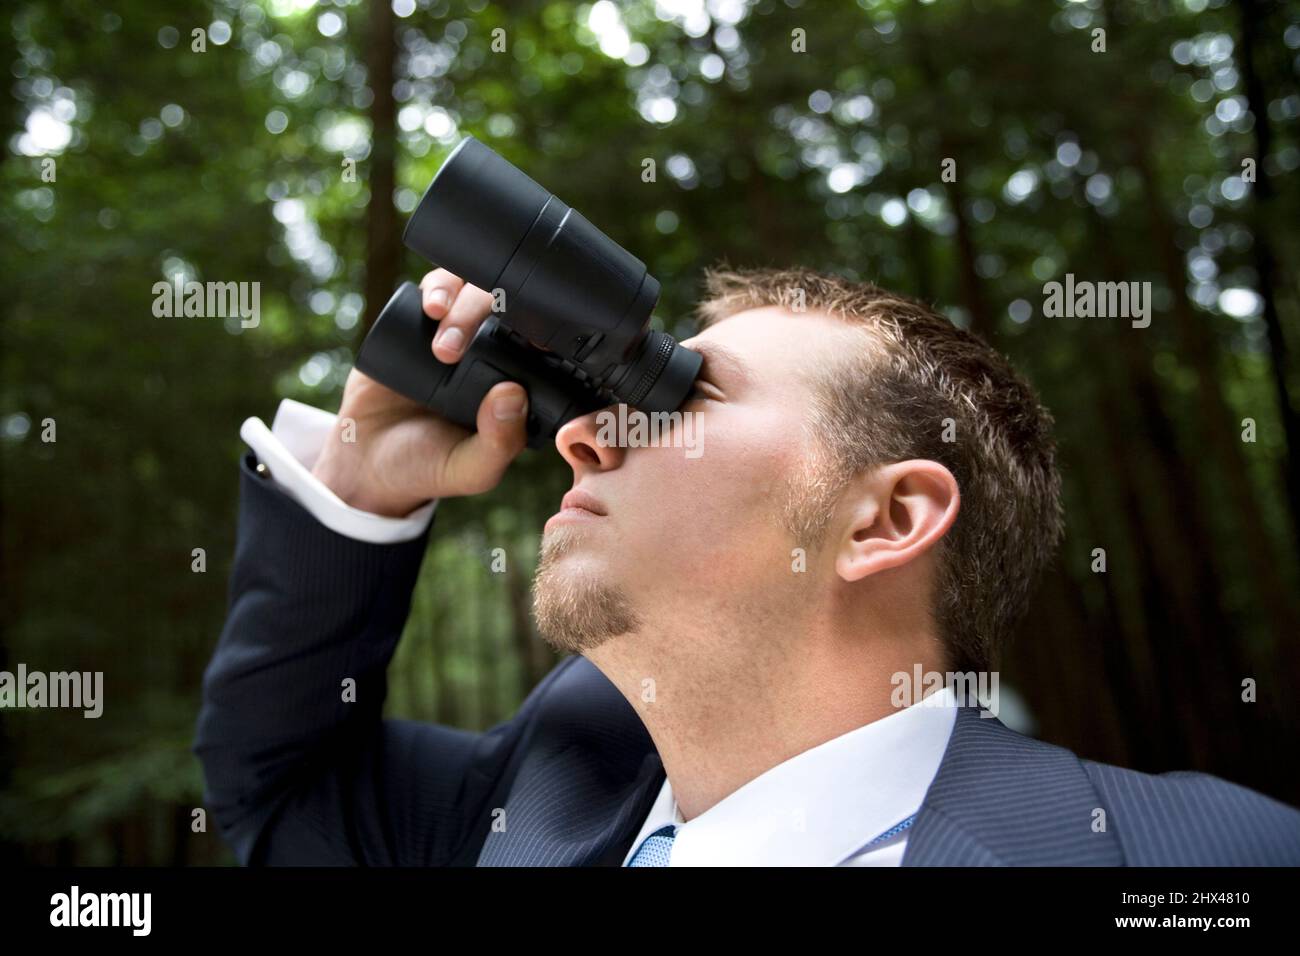 YOUNG BUSINESSMAN LOOKING THROUGH BINOCULARS IN TEMPERATE MIXED NORTHERN FOREST Stock Photo